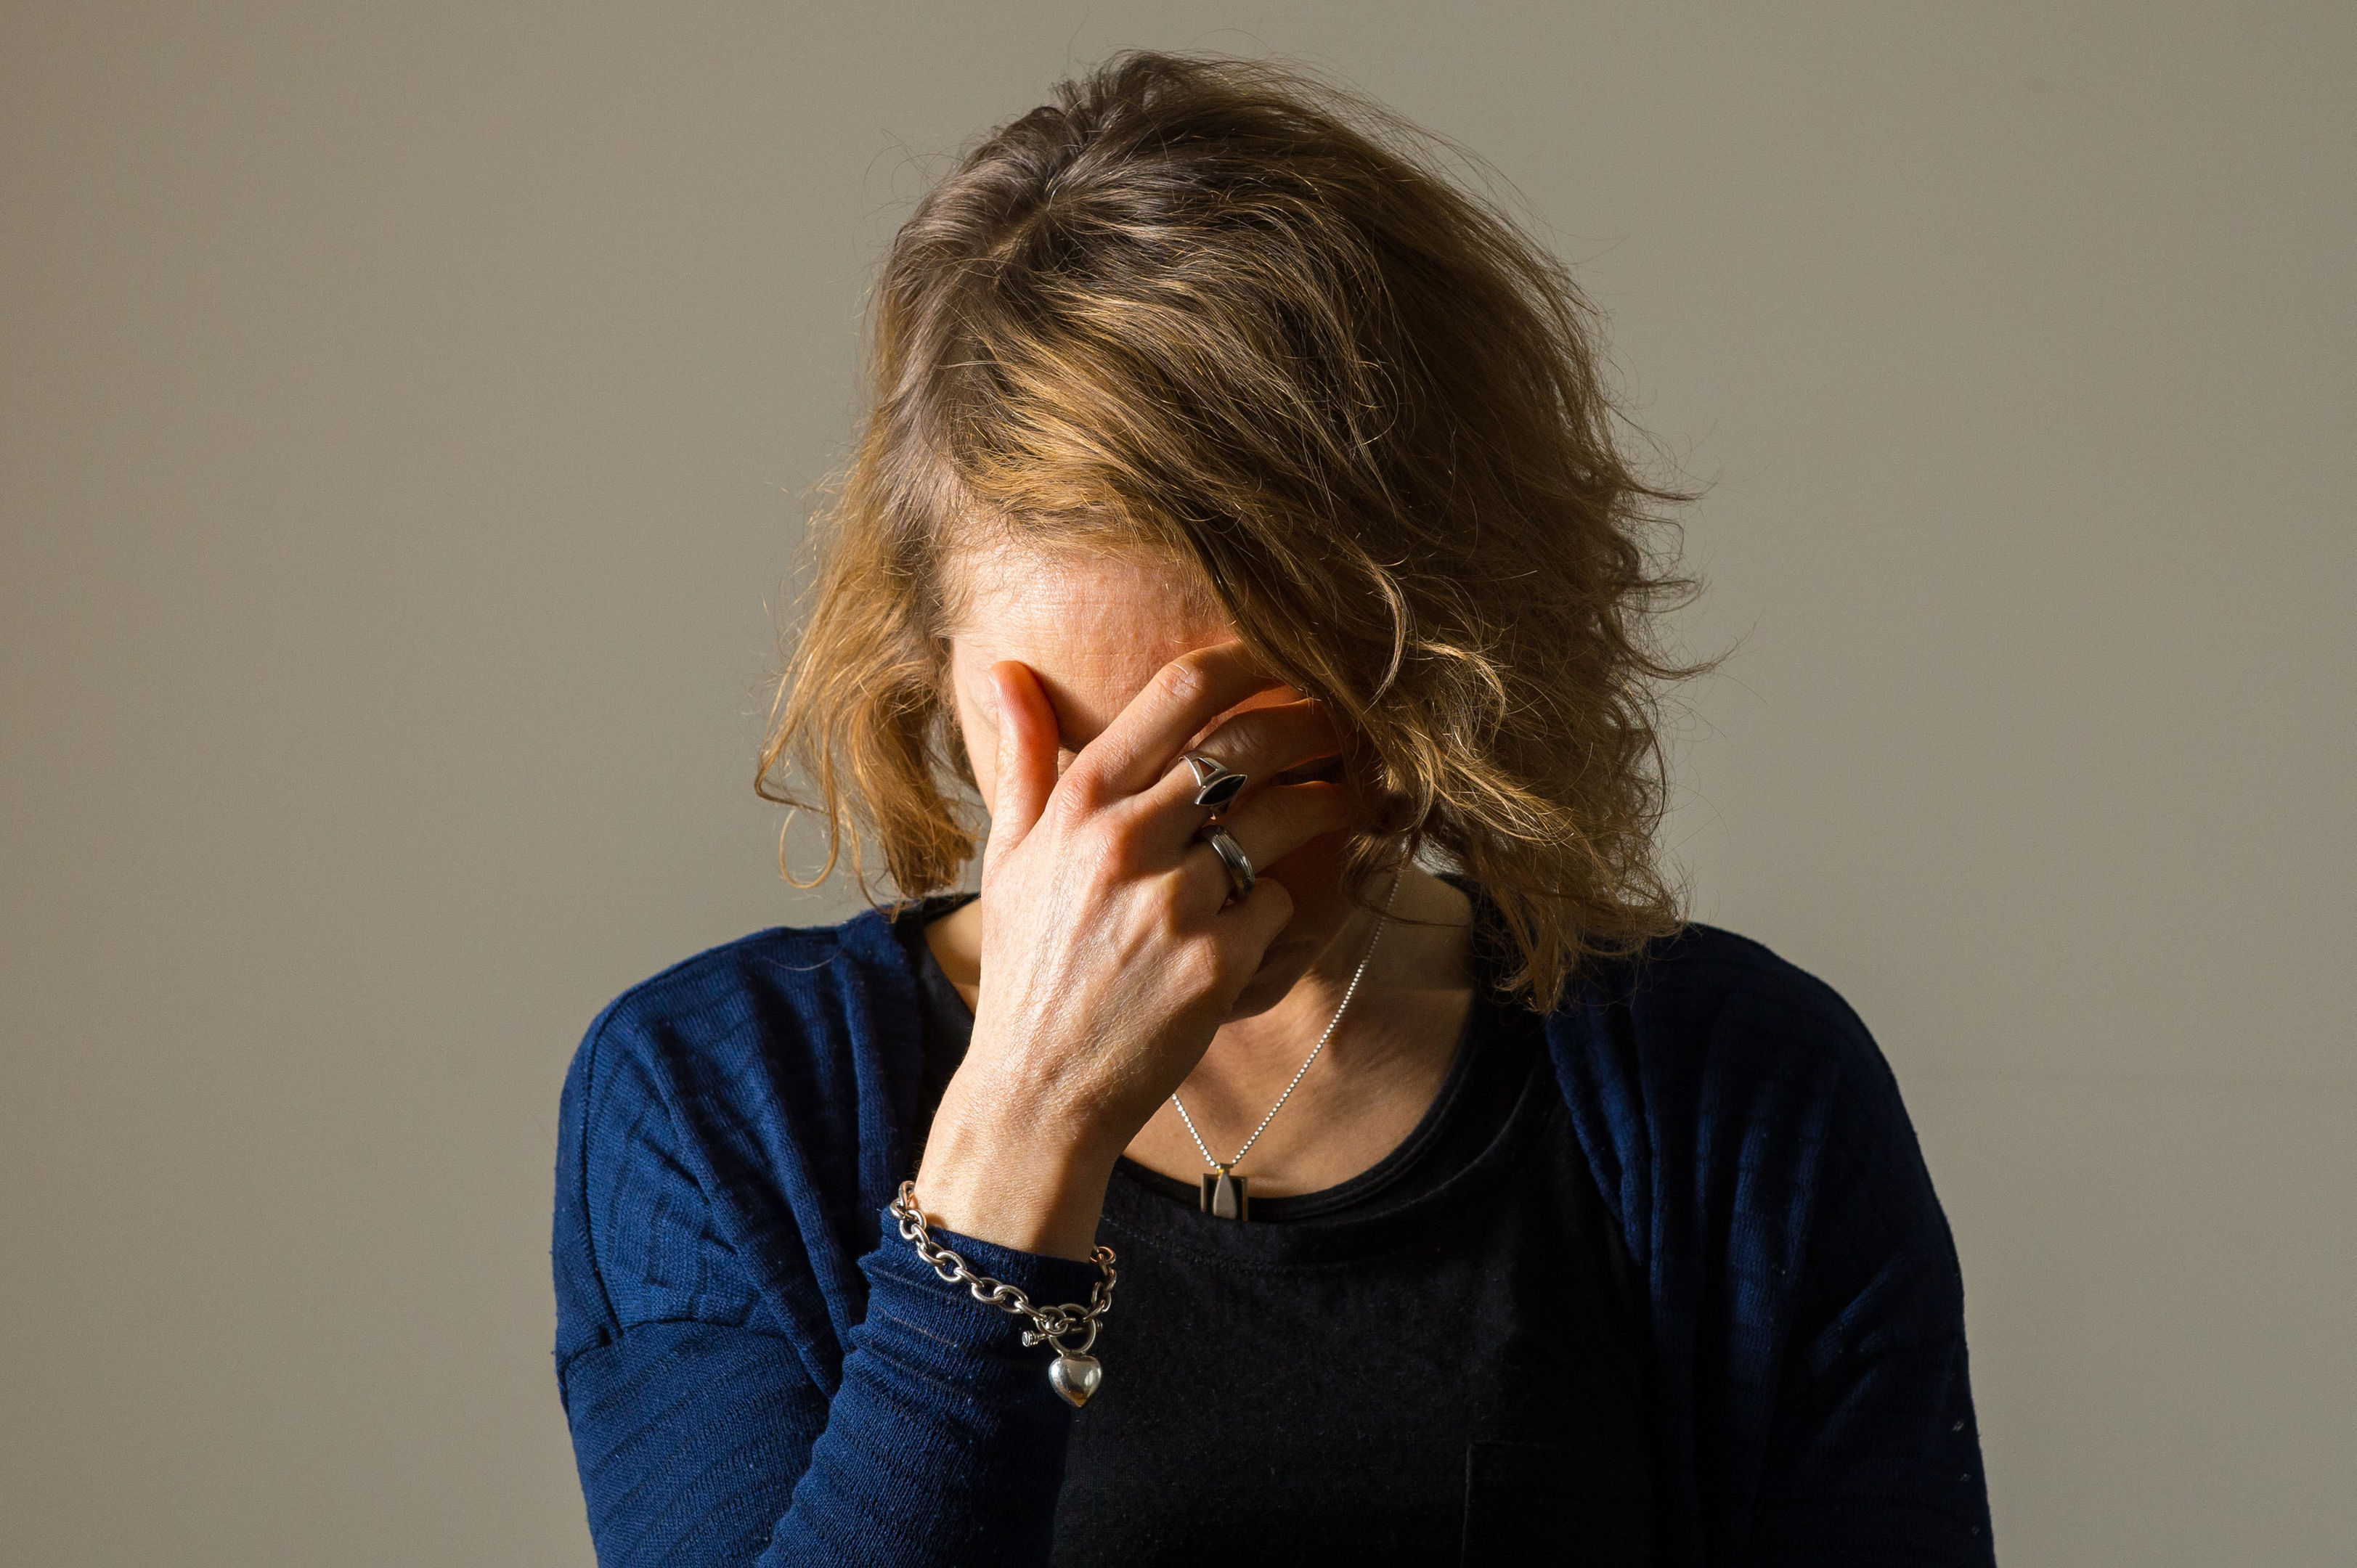 A report suggests that rising numbers of young people are suffering from mental health issues such as anxiety and stress. (Dominic Lipinski/PA Wire)